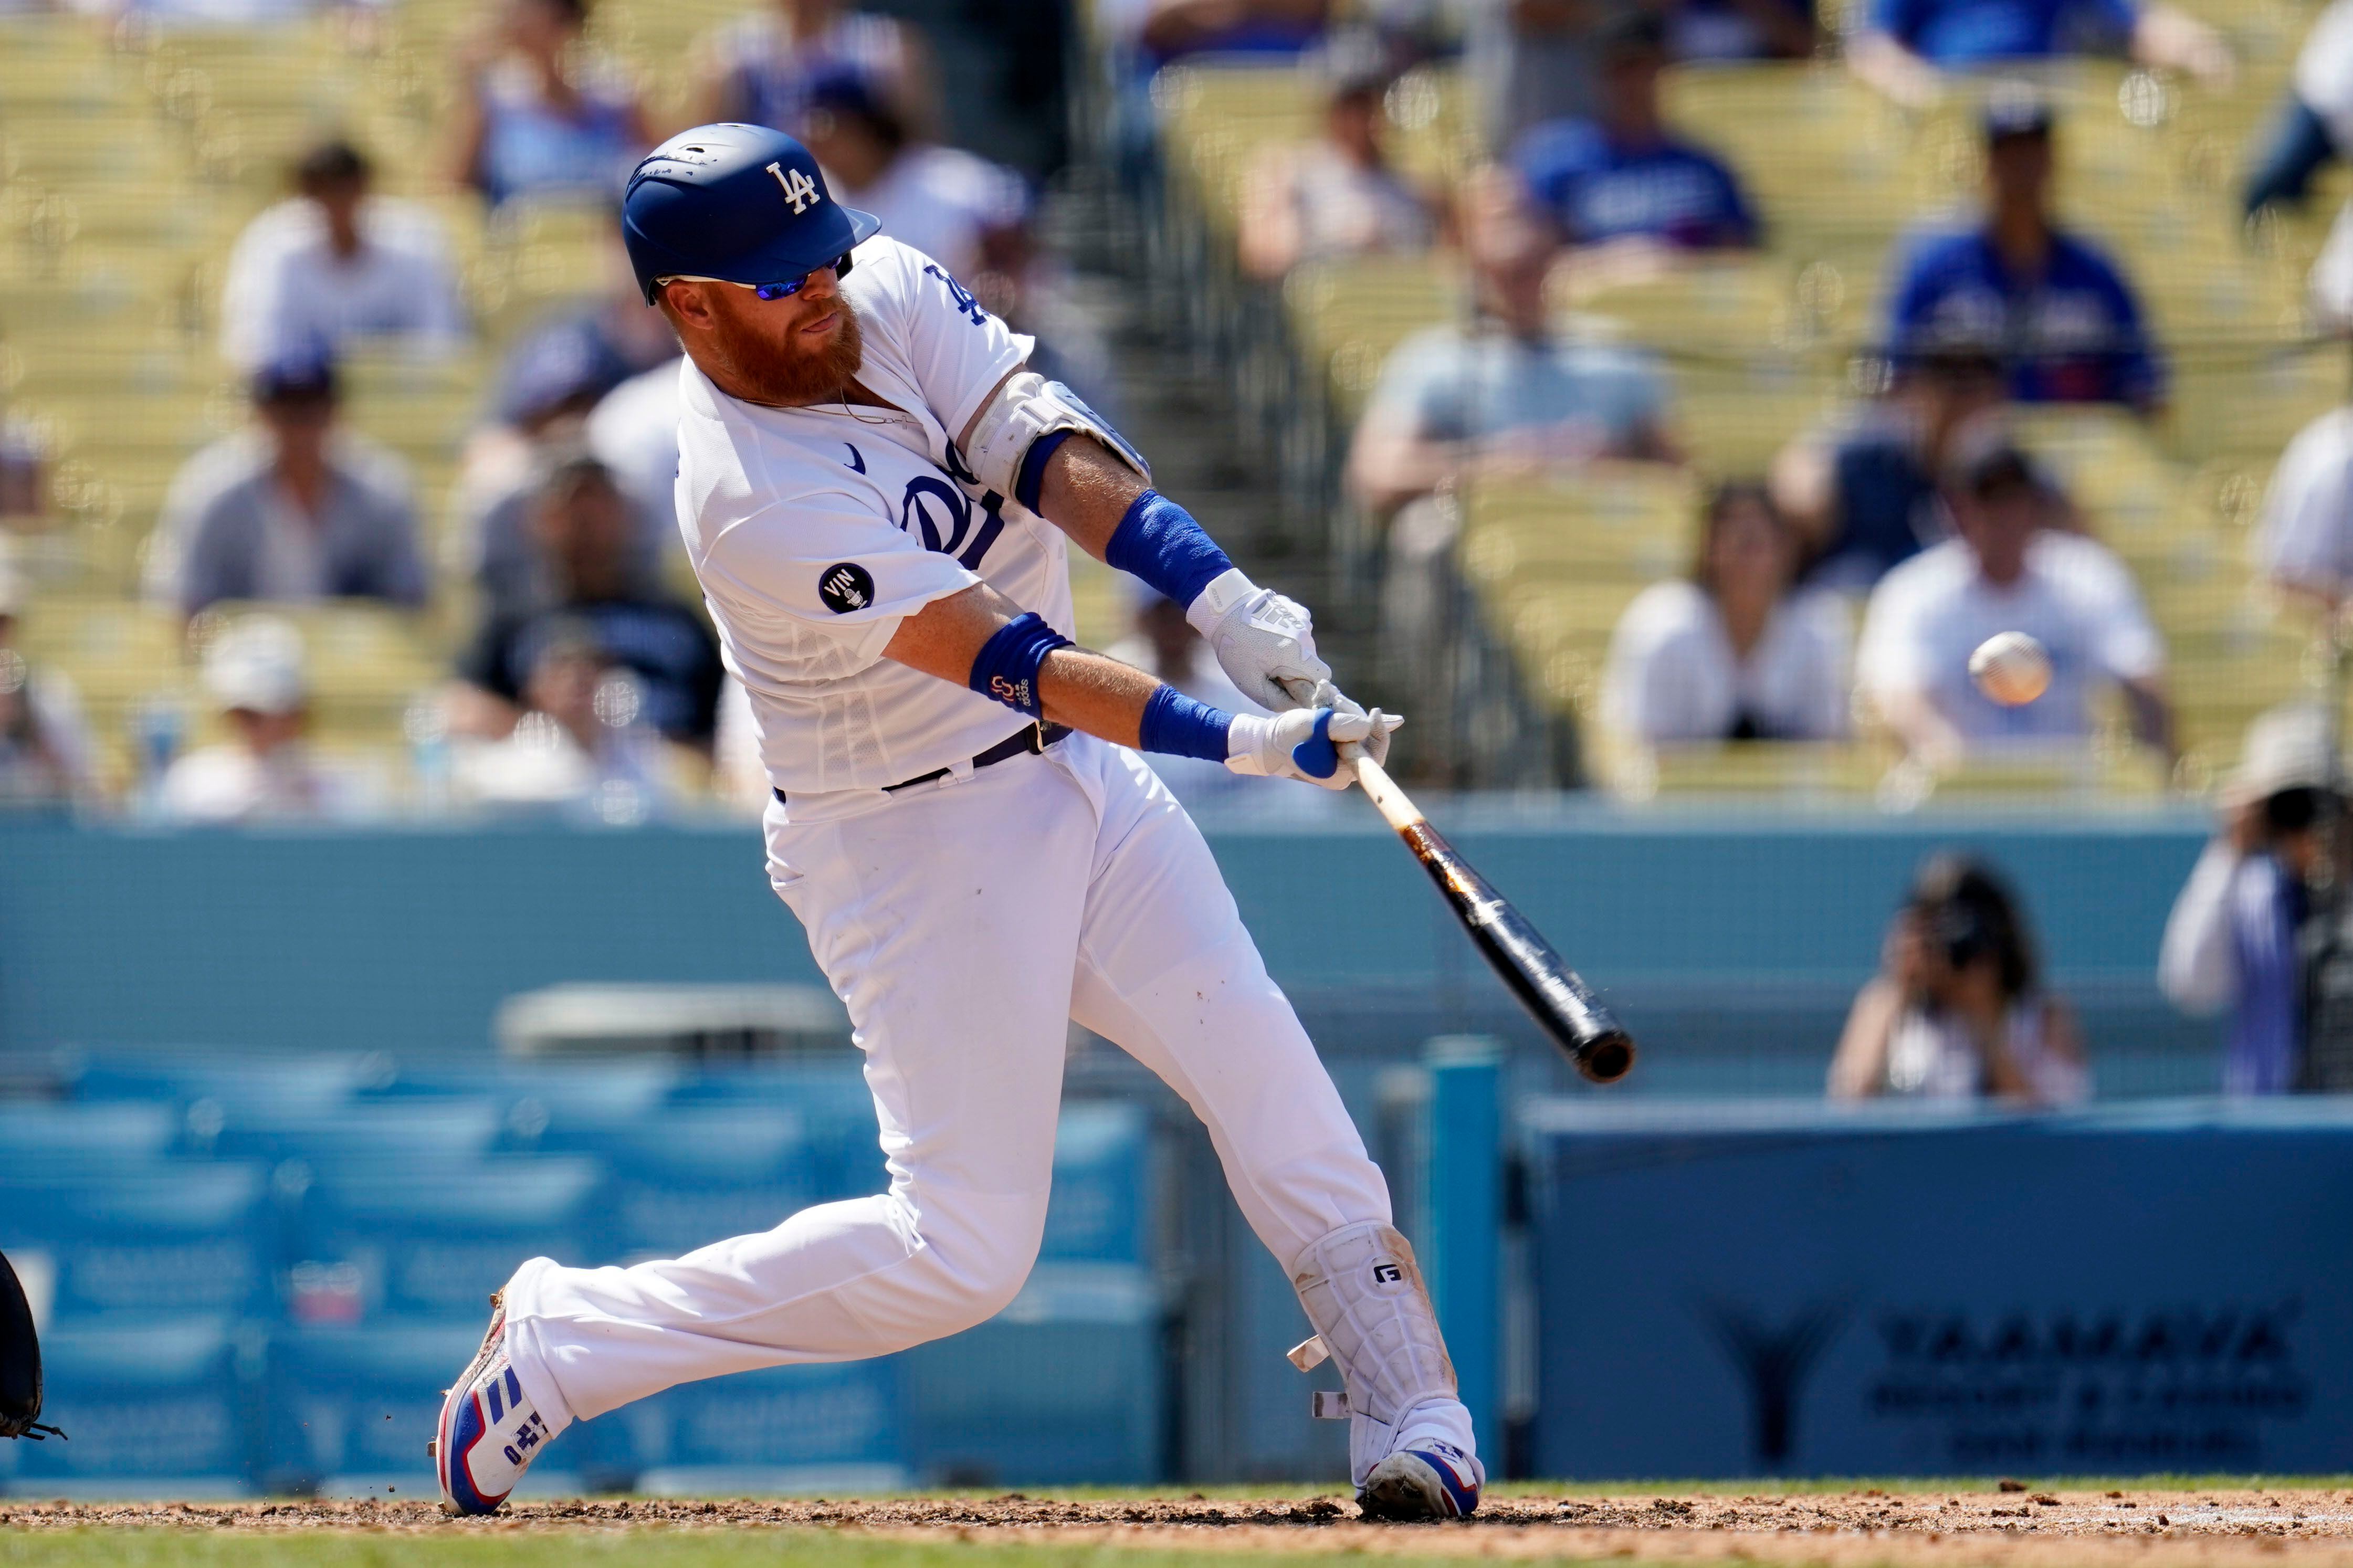 Max Muncy blasts two home runs, Dodgers rally past Reds 3-2